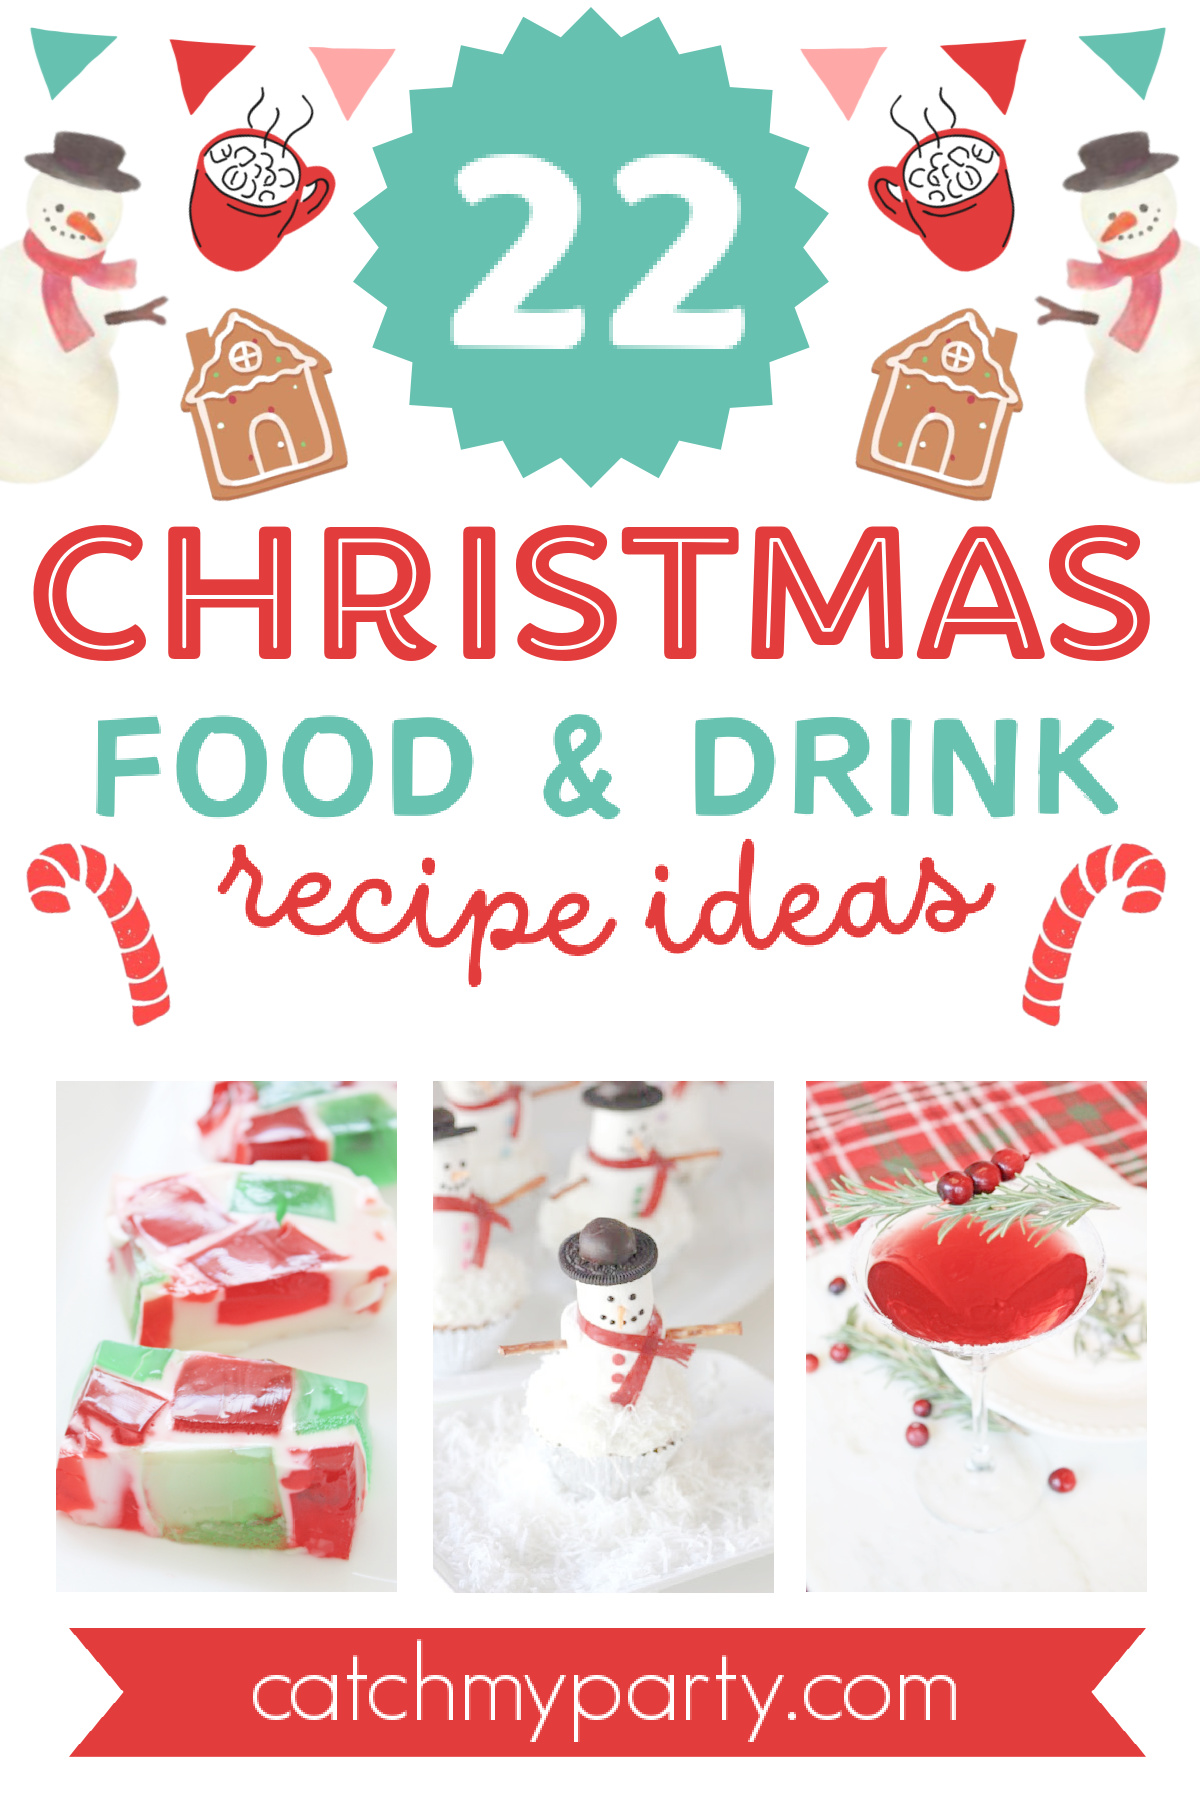 Celebrate This Holiday Season With These Fantastic Christmas Food and Drink Ideas!